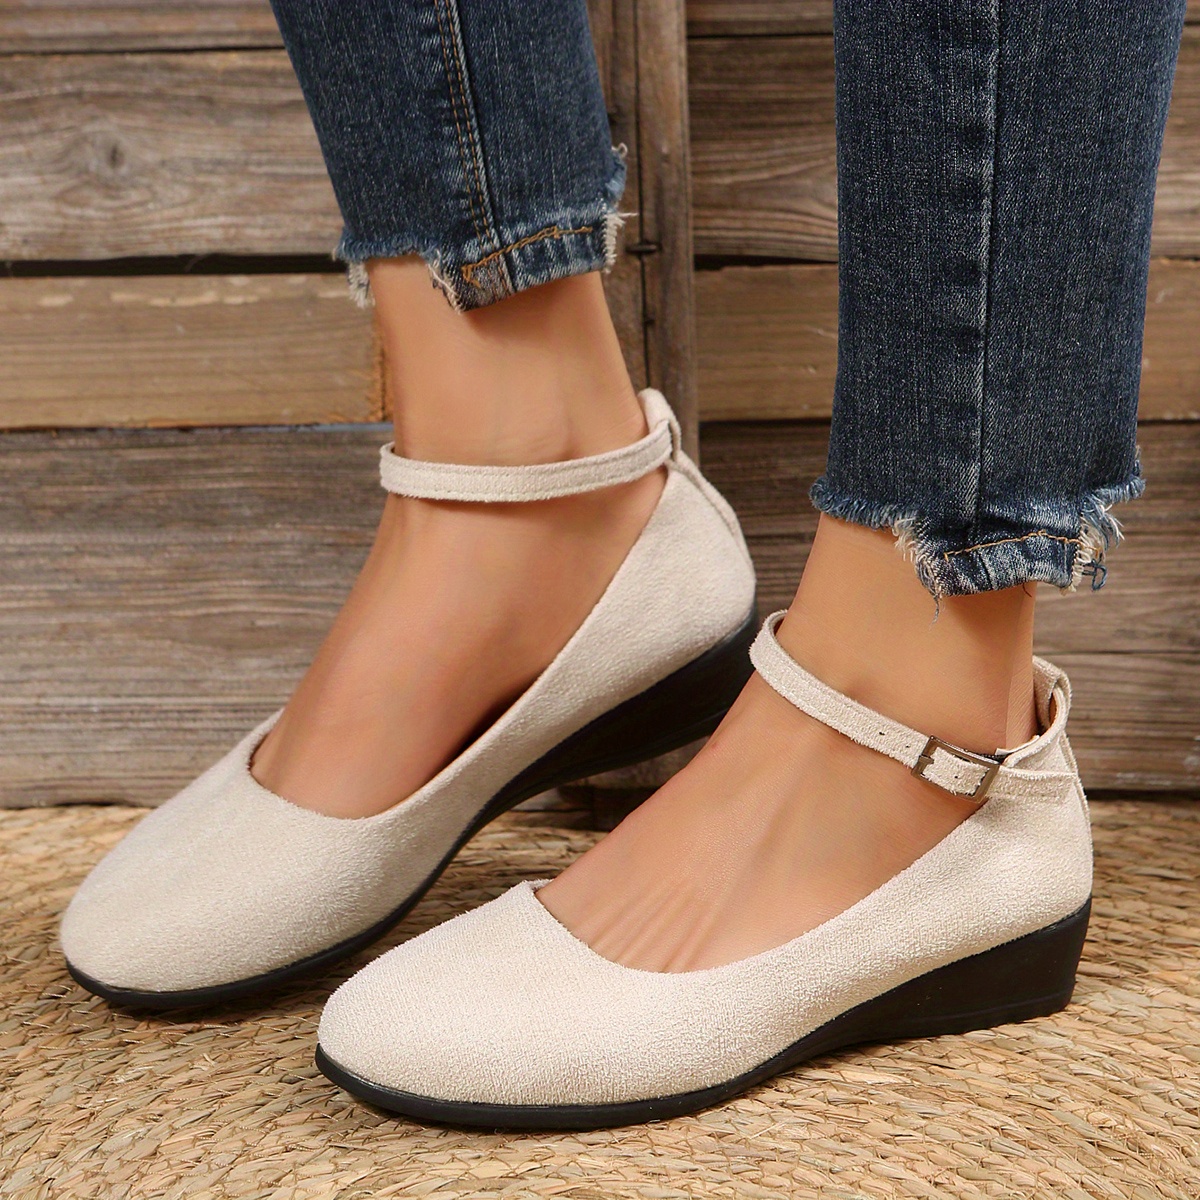 Small Sized Classic Wedge Ankle Strap - by Pretty Small Shoes